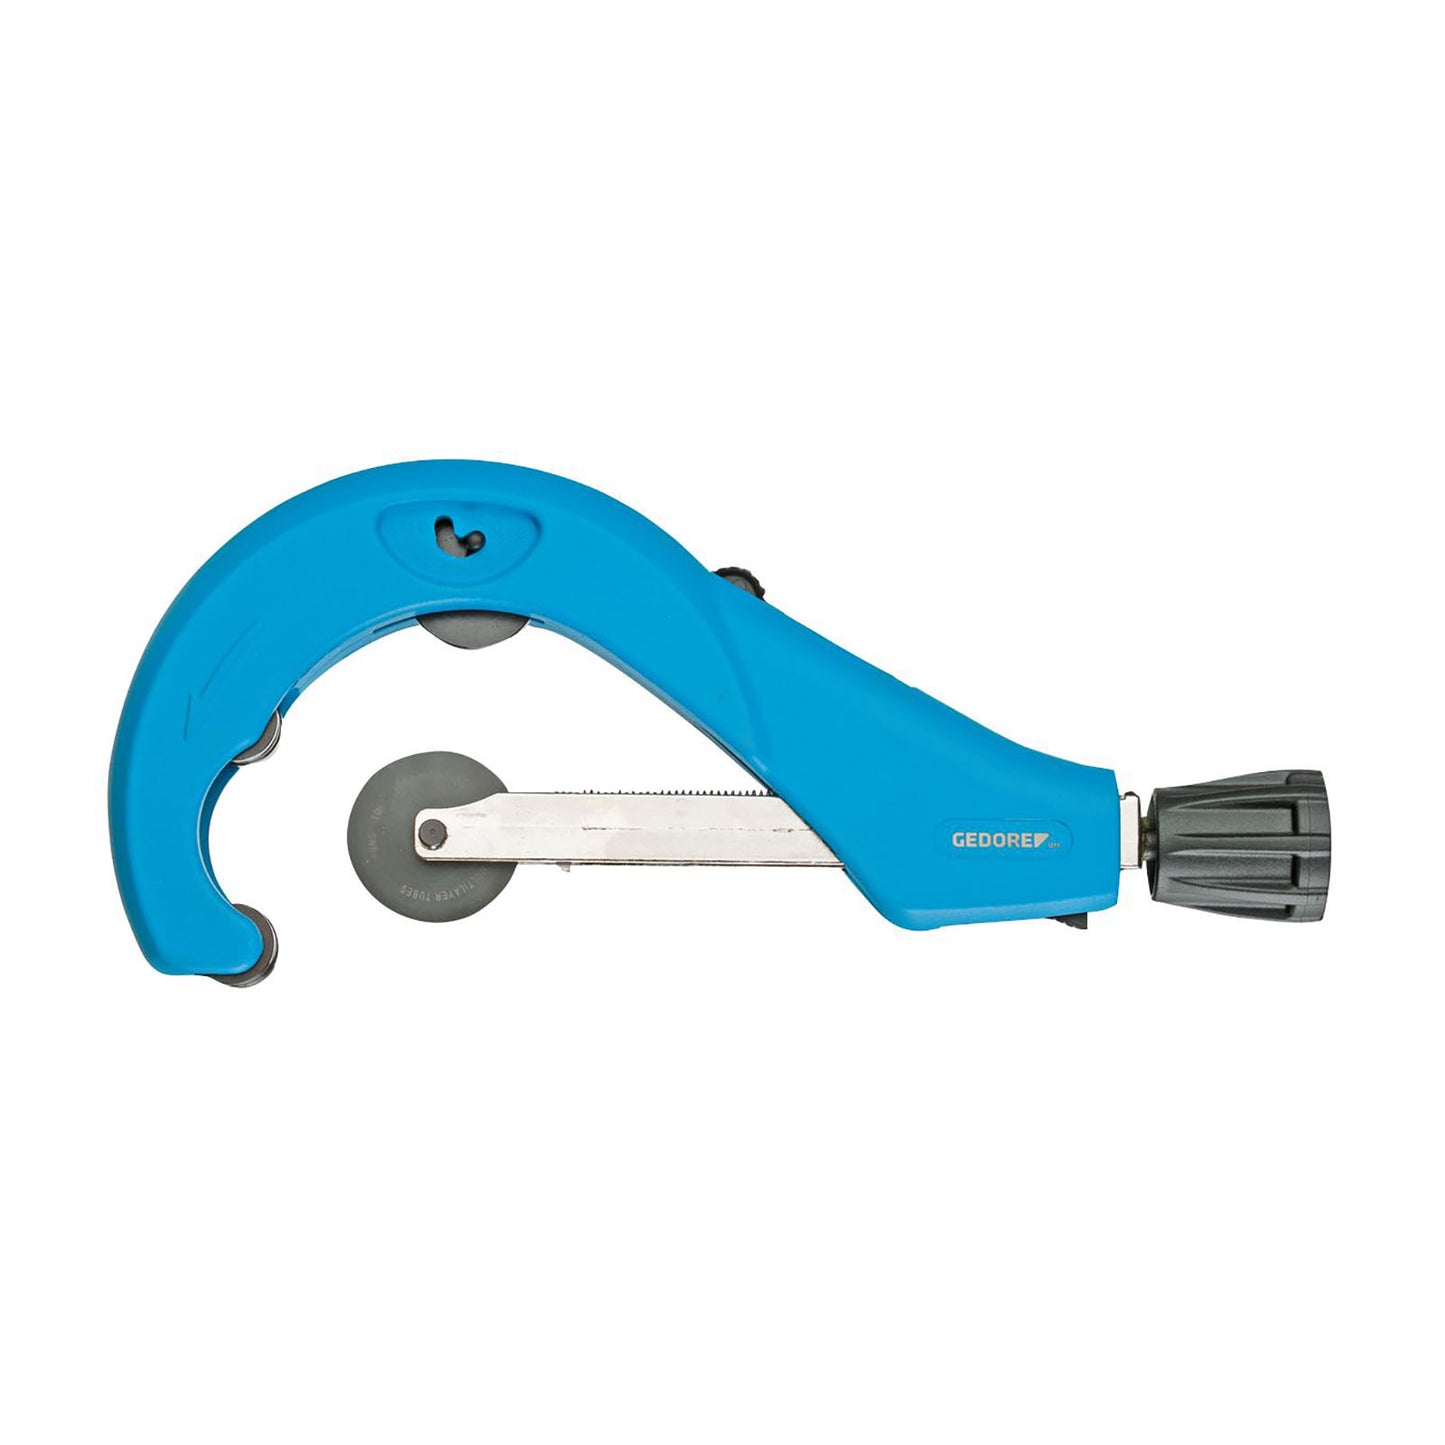 GEDORE 2270 5 - Multilayer pipe cutter 6-76 mm (2964015)